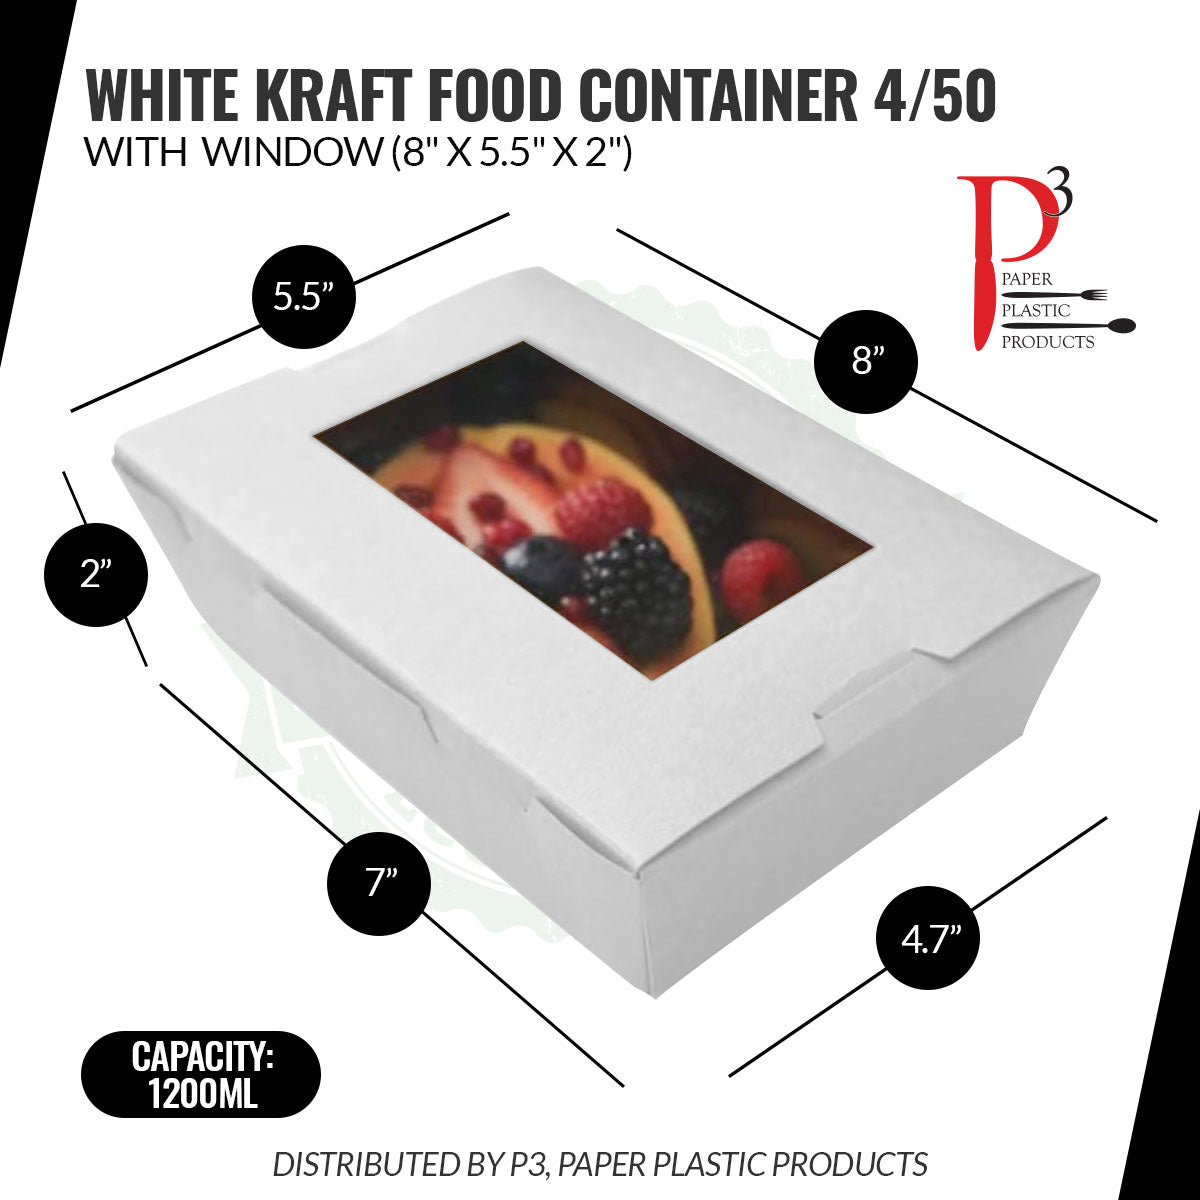 Kraft Food Container White with window 8" x 5.5" x 2" 4/50